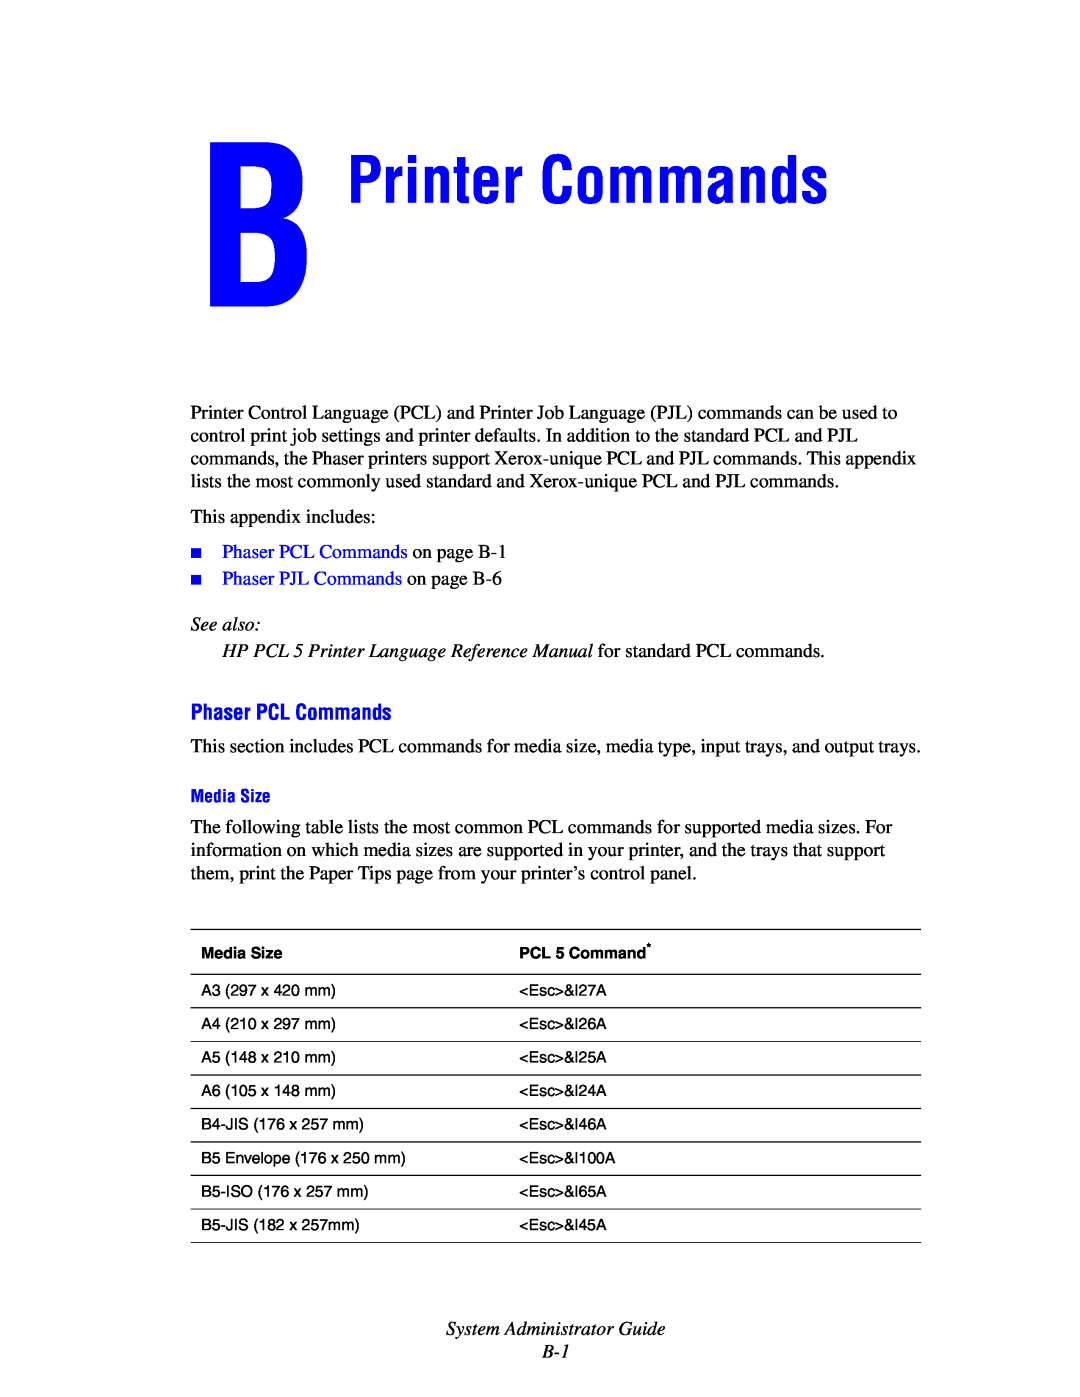 Xerox 1235DT, 4510 manual Printer Commands, Phaser PCL Commands on page B-1, Phaser PJL Commands on page B-6, See also 